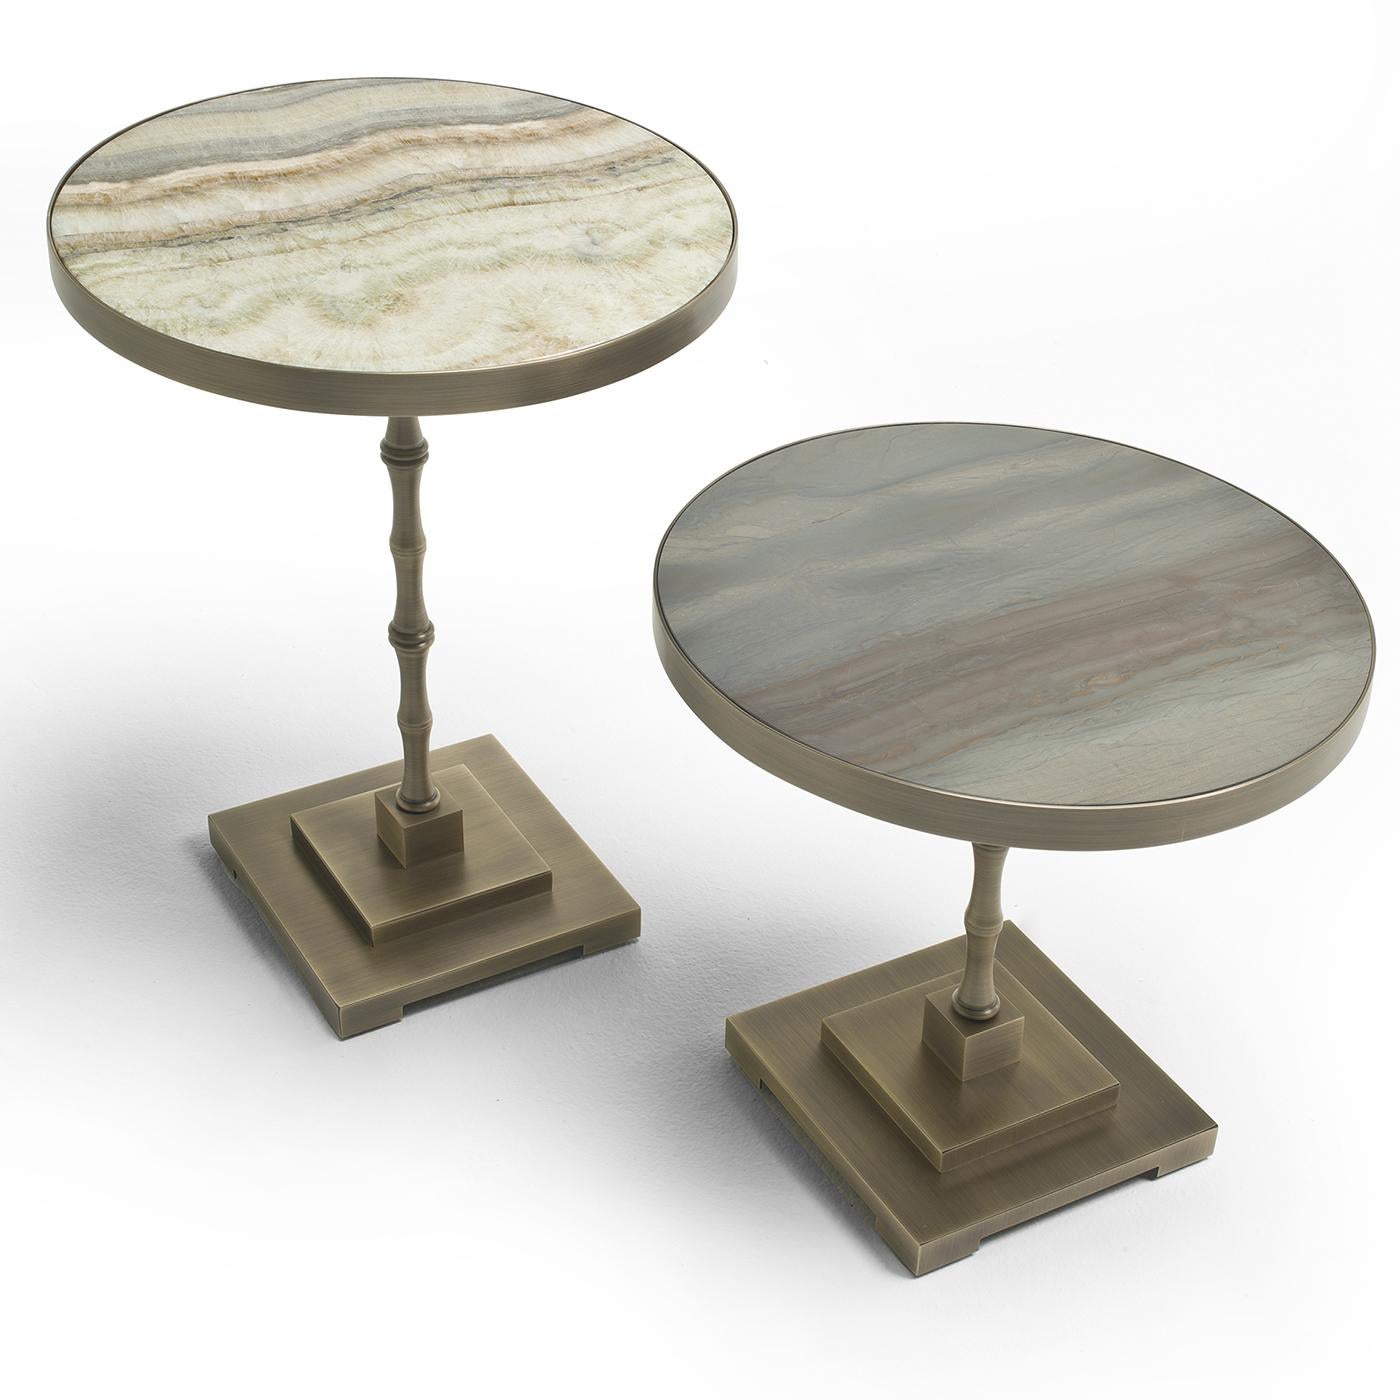 Marble take center stage in this original side table by Fratelli Boffi. The shorter of the two in the Marmora Collection, this side table features a brushed marble top. The table is completed by a stacked square base and a bamboo-inspired stem. Pair